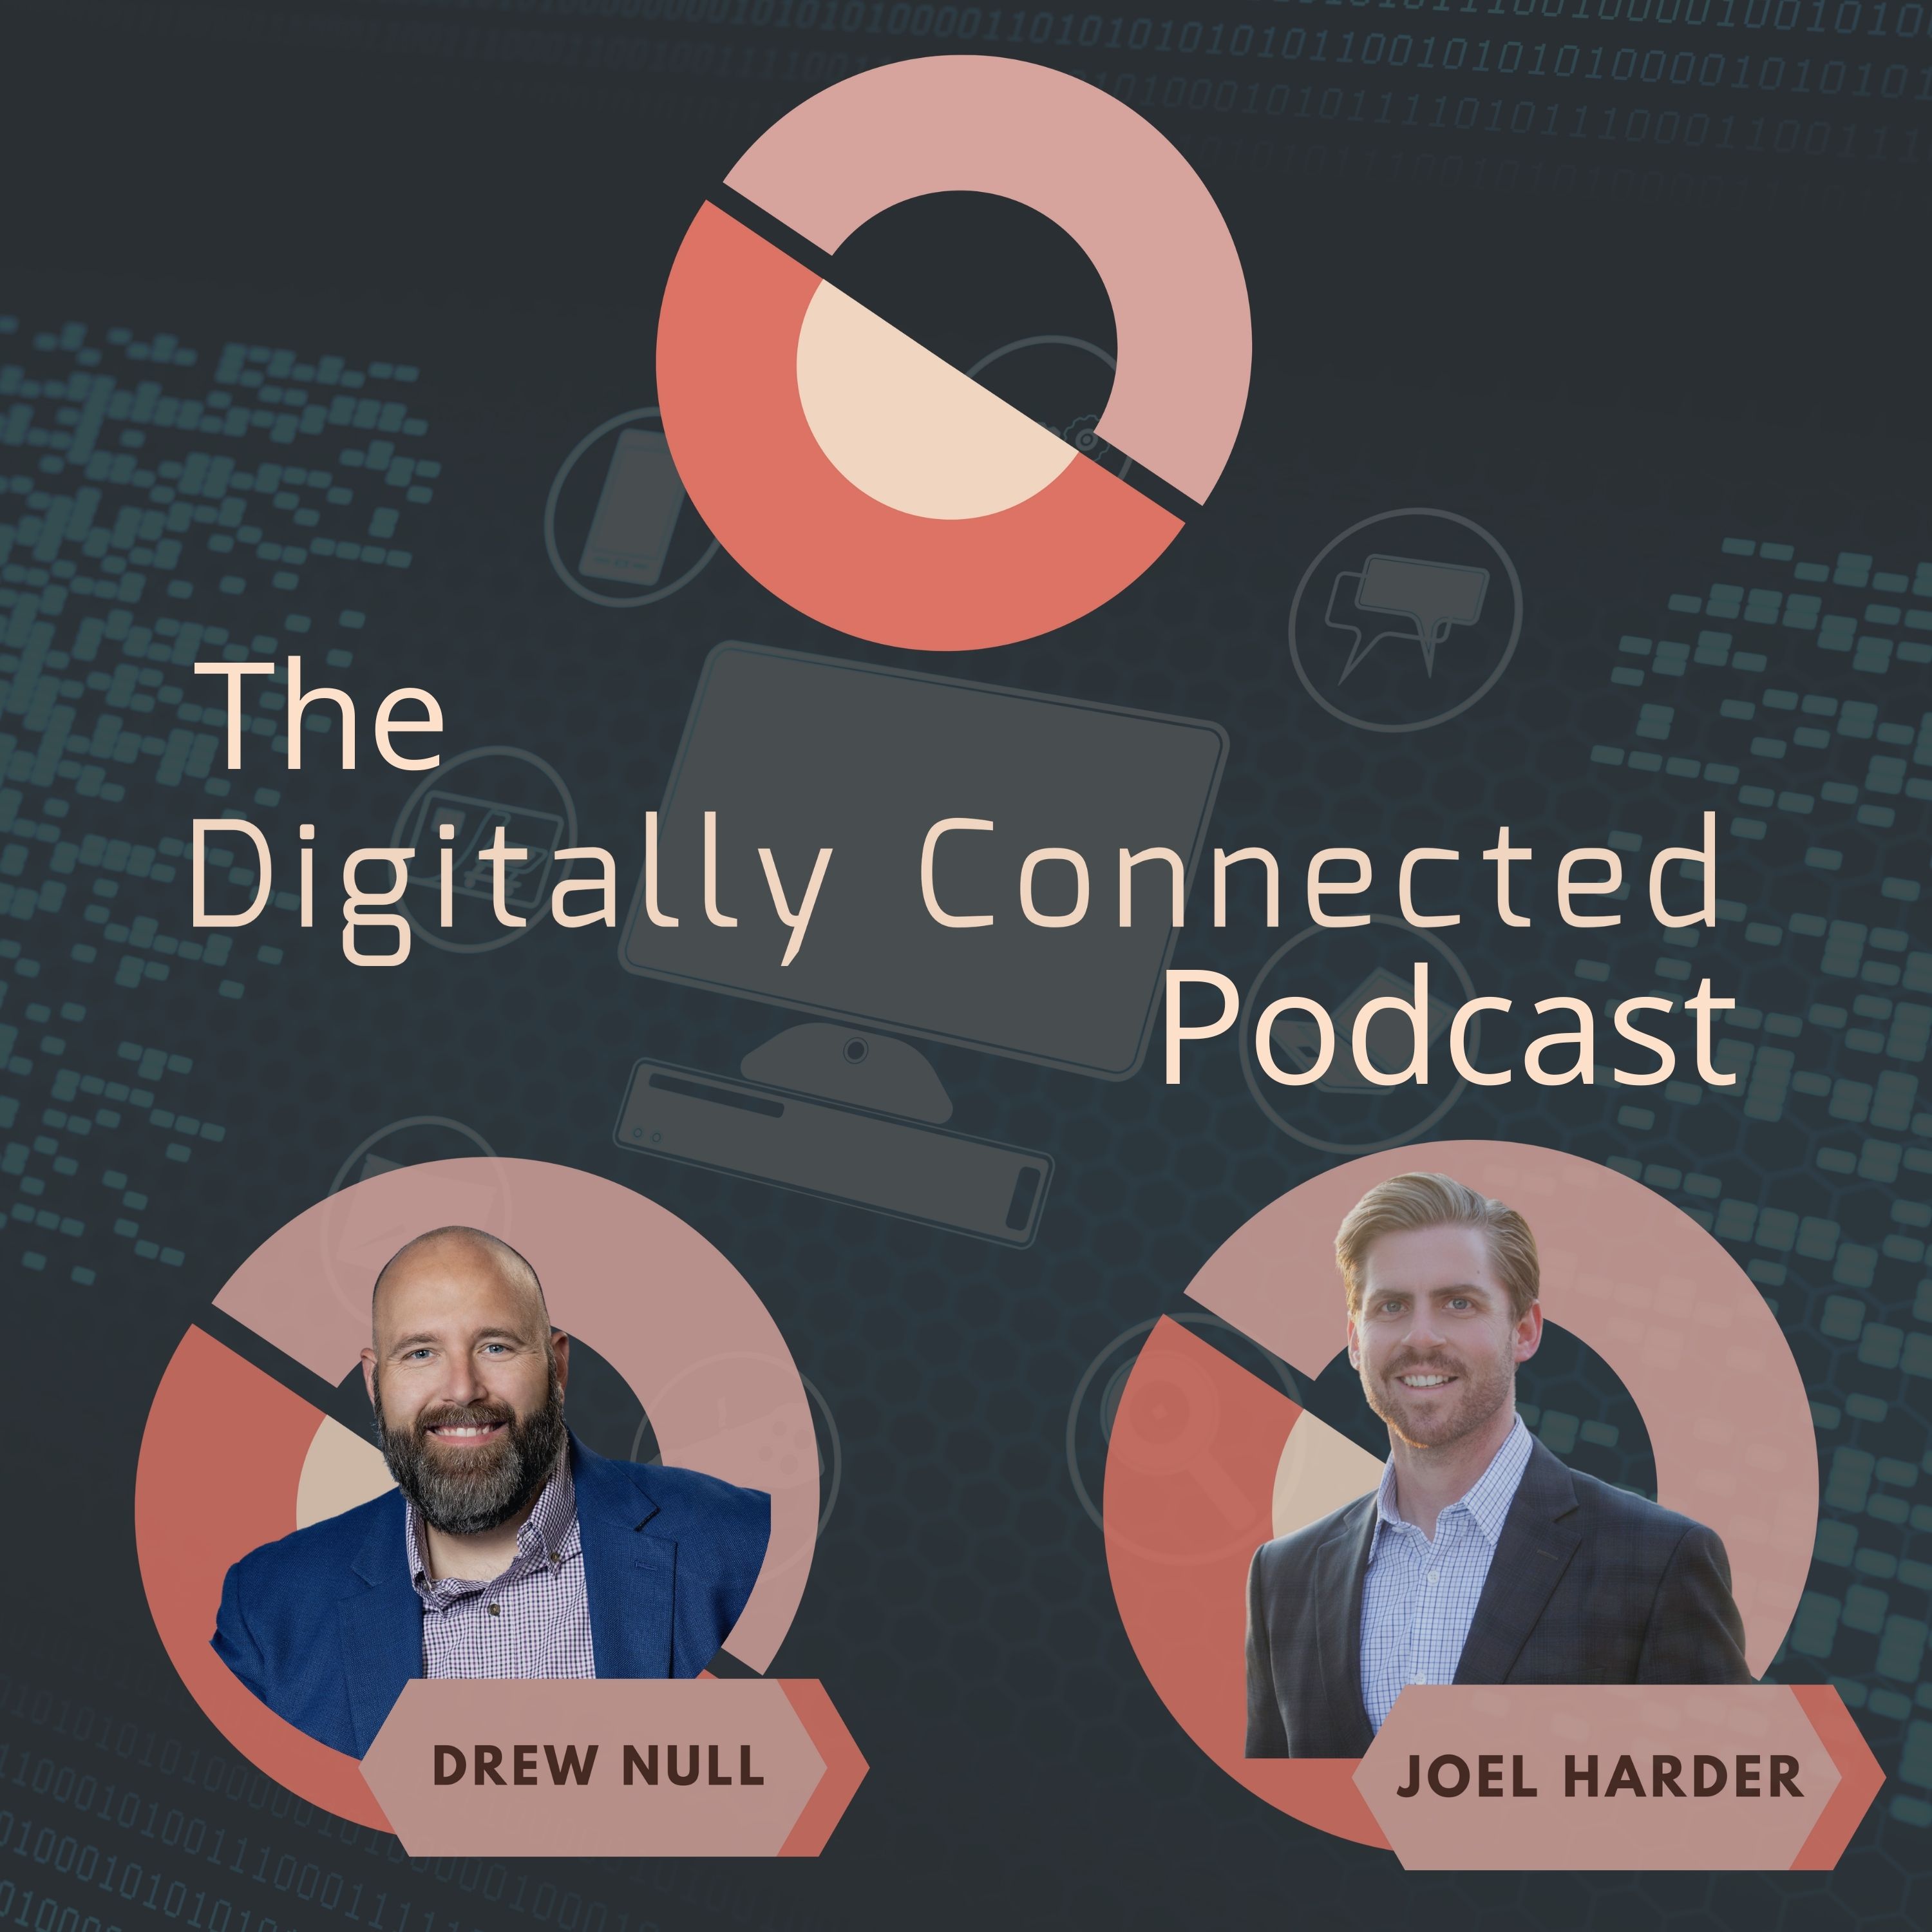 The Digitally Connected Podcast